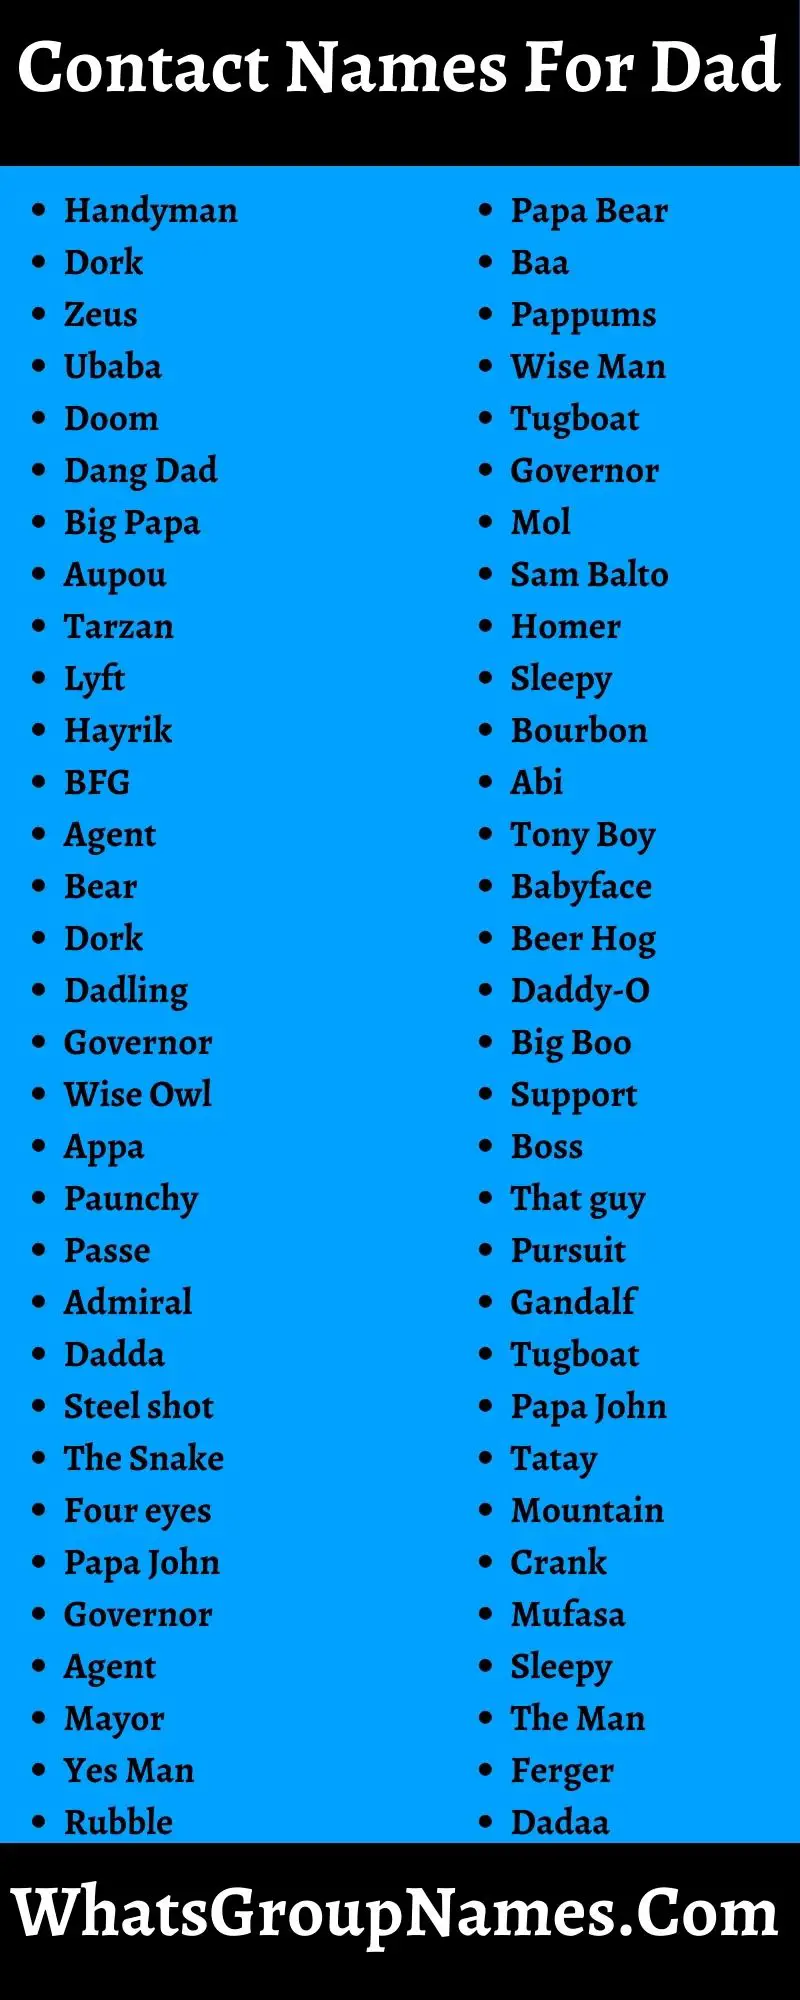 Contact Names For Dad